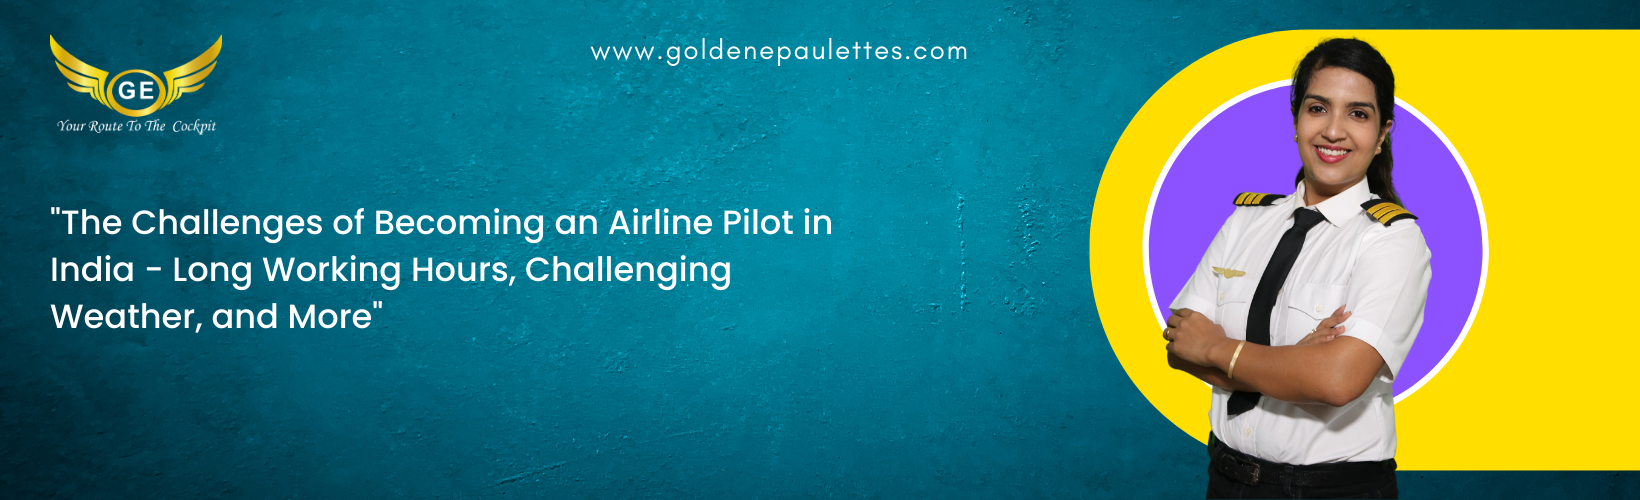 The Challenges of Becoming a Pilot in India